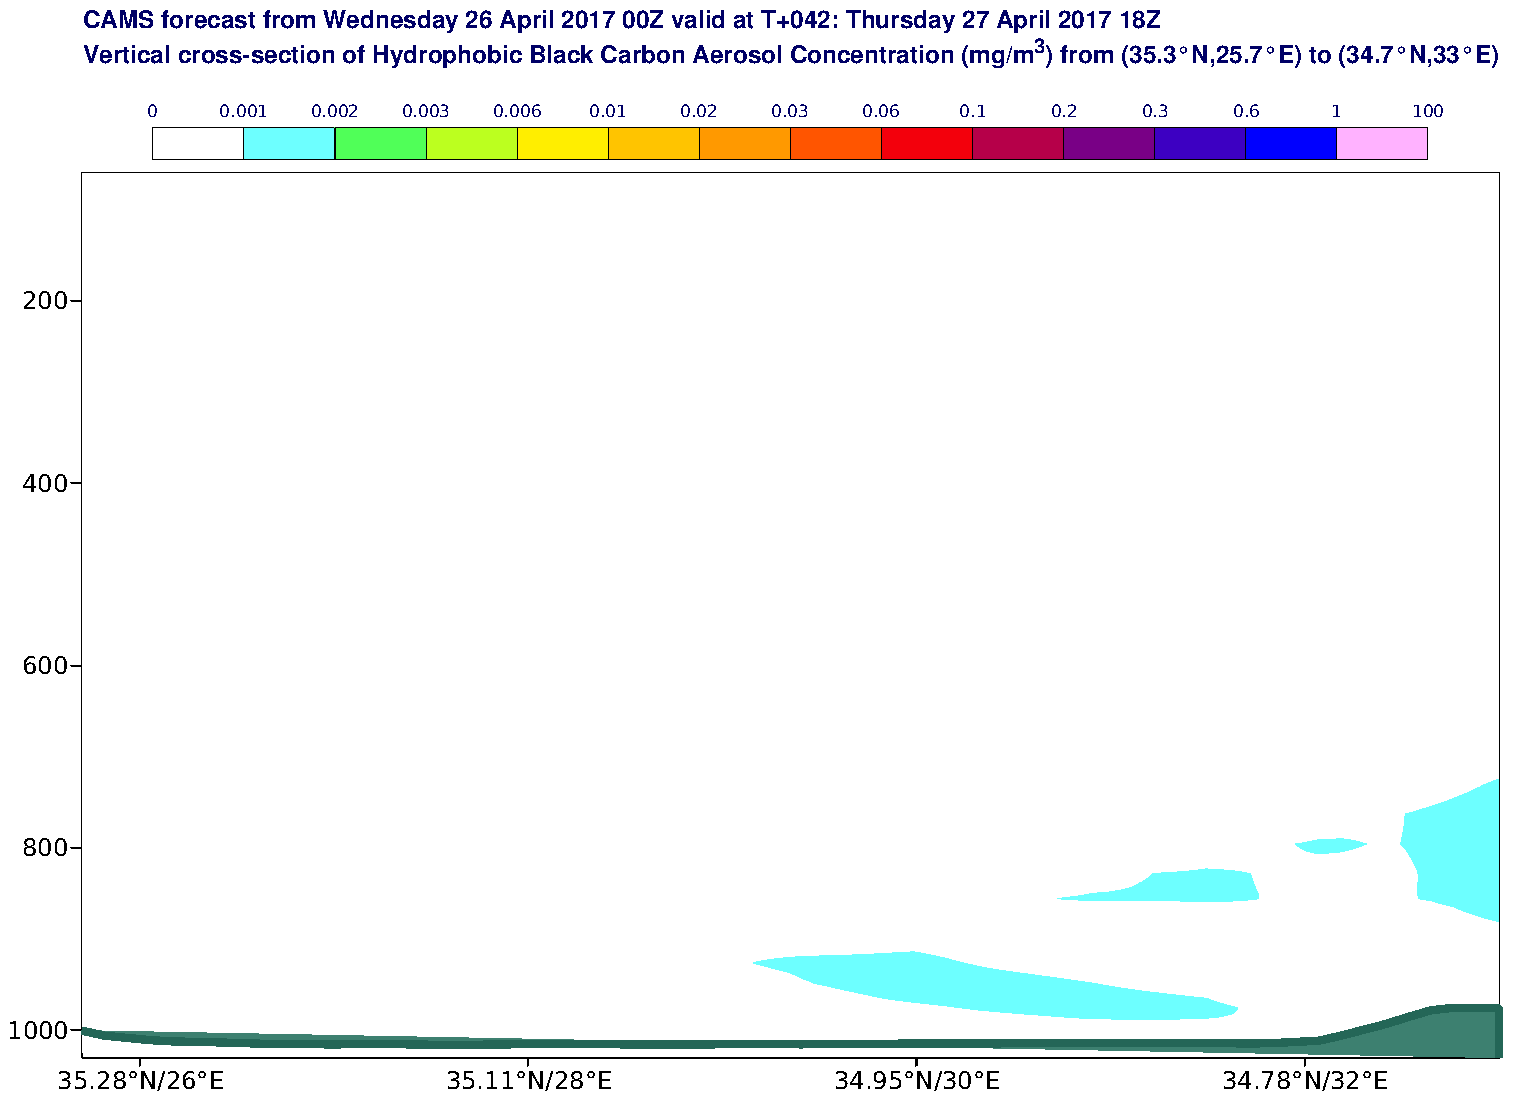 Vertical cross-section of Hydrophobic Black Carbon Aerosol Concentration (mg/m3) valid at T42 - 2017-04-27 18:00